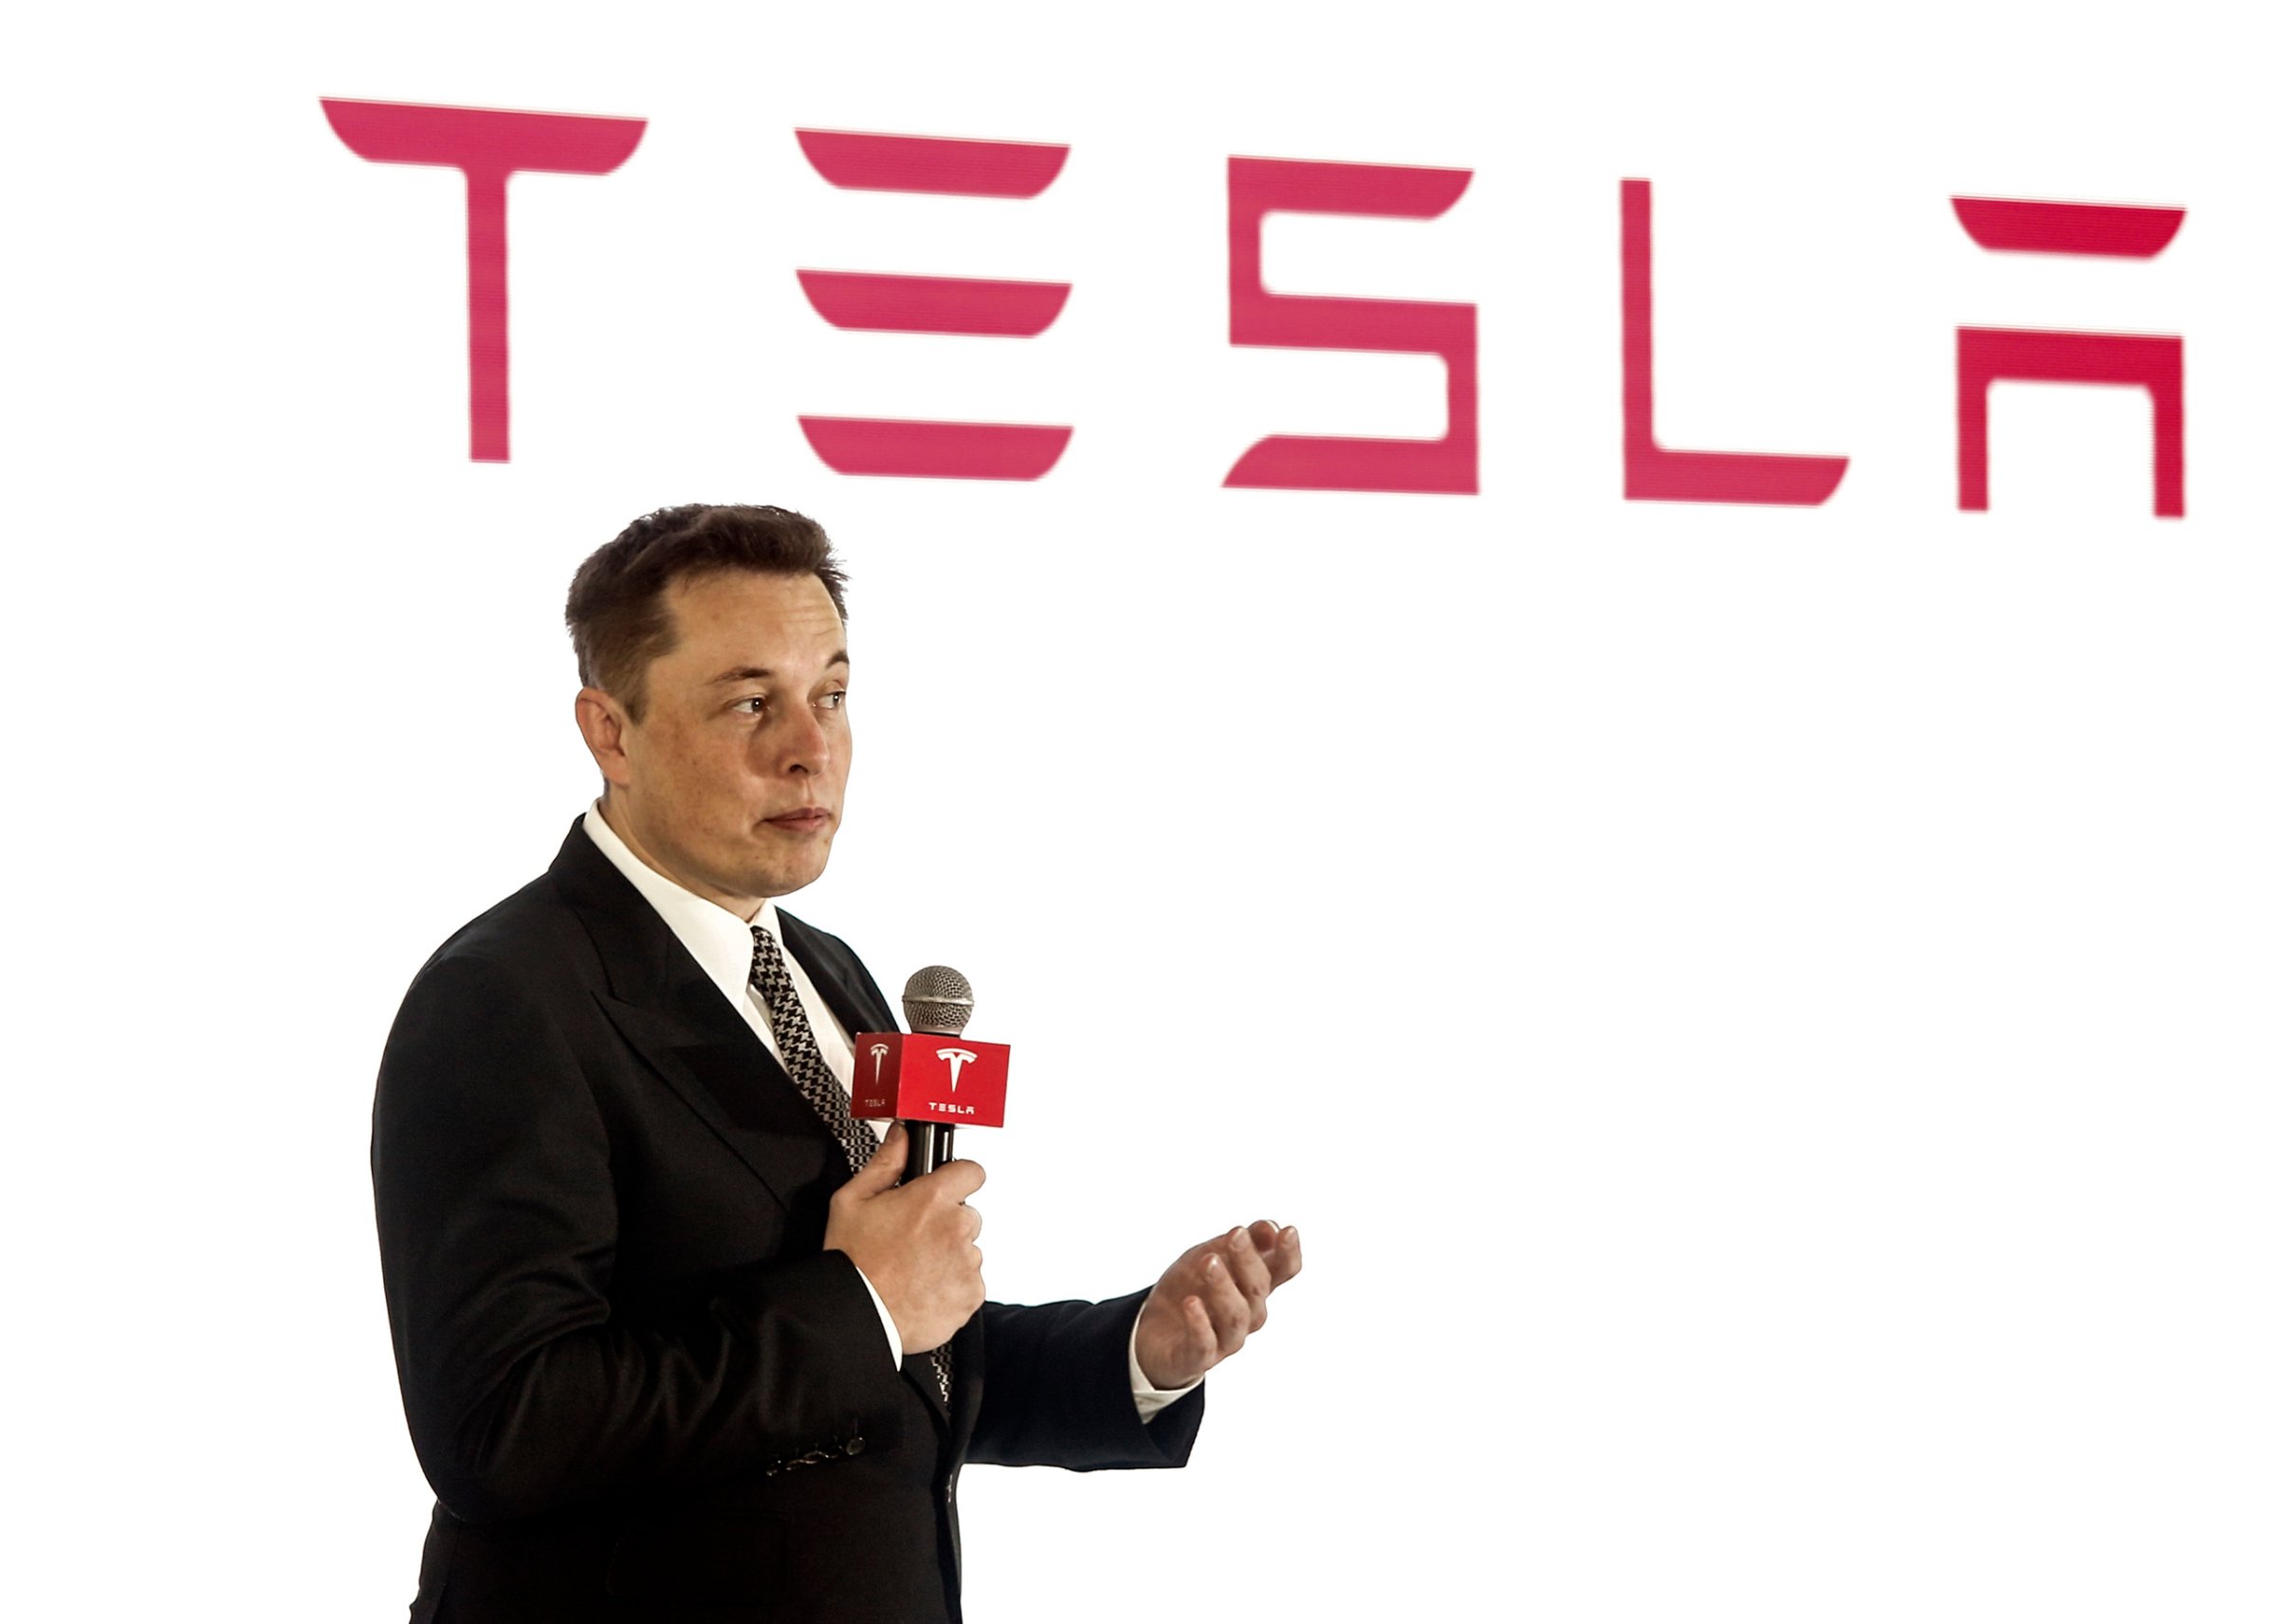 OCTOBER 23: (CHINA OUT) Elon Musk, Chairman, CEO and Product Architect of Tesla Motors, addresses a press conference to declare that the Tesla Motors releases v7.0 System in China on October 23, 2015. in Beijing, China. The v7.0 system includes Autosteer, a new Autopilot feature. While it's not absolutely self-driving and the driver still need to hold the steering wheel and be mindful of road conditions and surrounding traffic when using Autosteer. When set to the new Autosteer mode, graphics on the driver's display will show the path the Model S is following, post the current speed limit and indicate if a car is in front of the Tesla. (Photo by VCG/VCG via Getty Images)